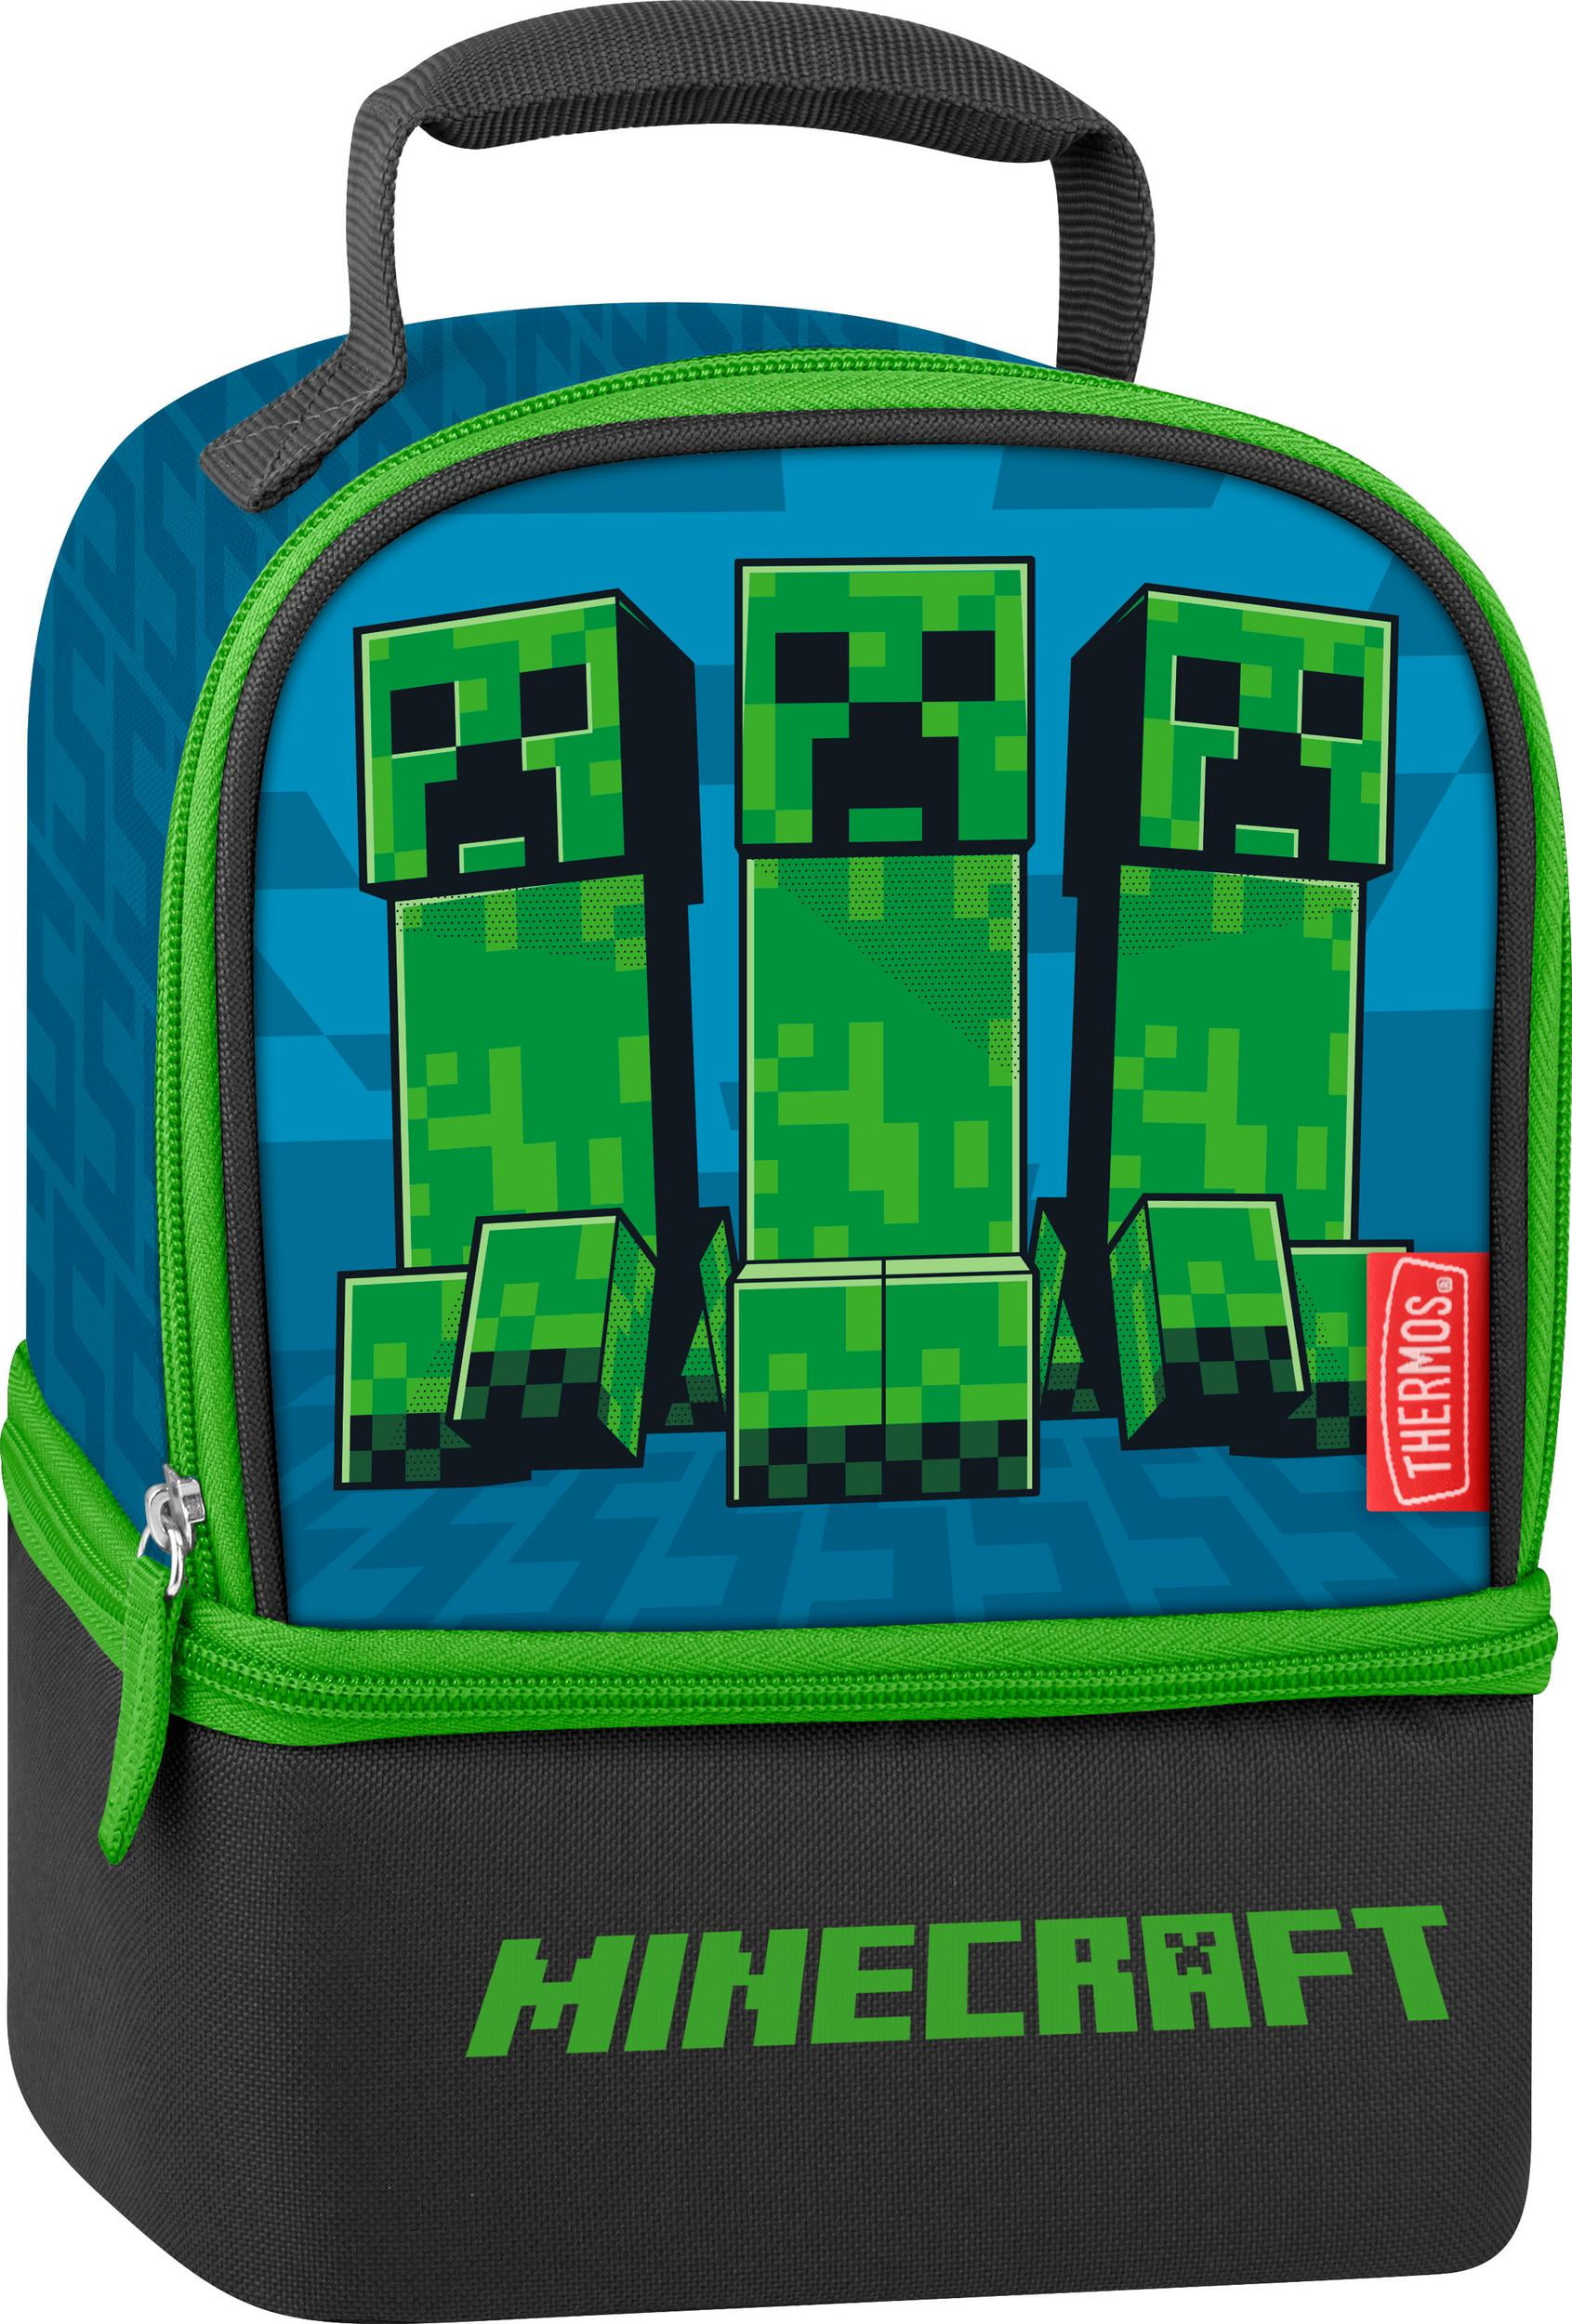 Thermos Minecraft Creeper Insulated Lunch Bag Dual Compartment NEW 